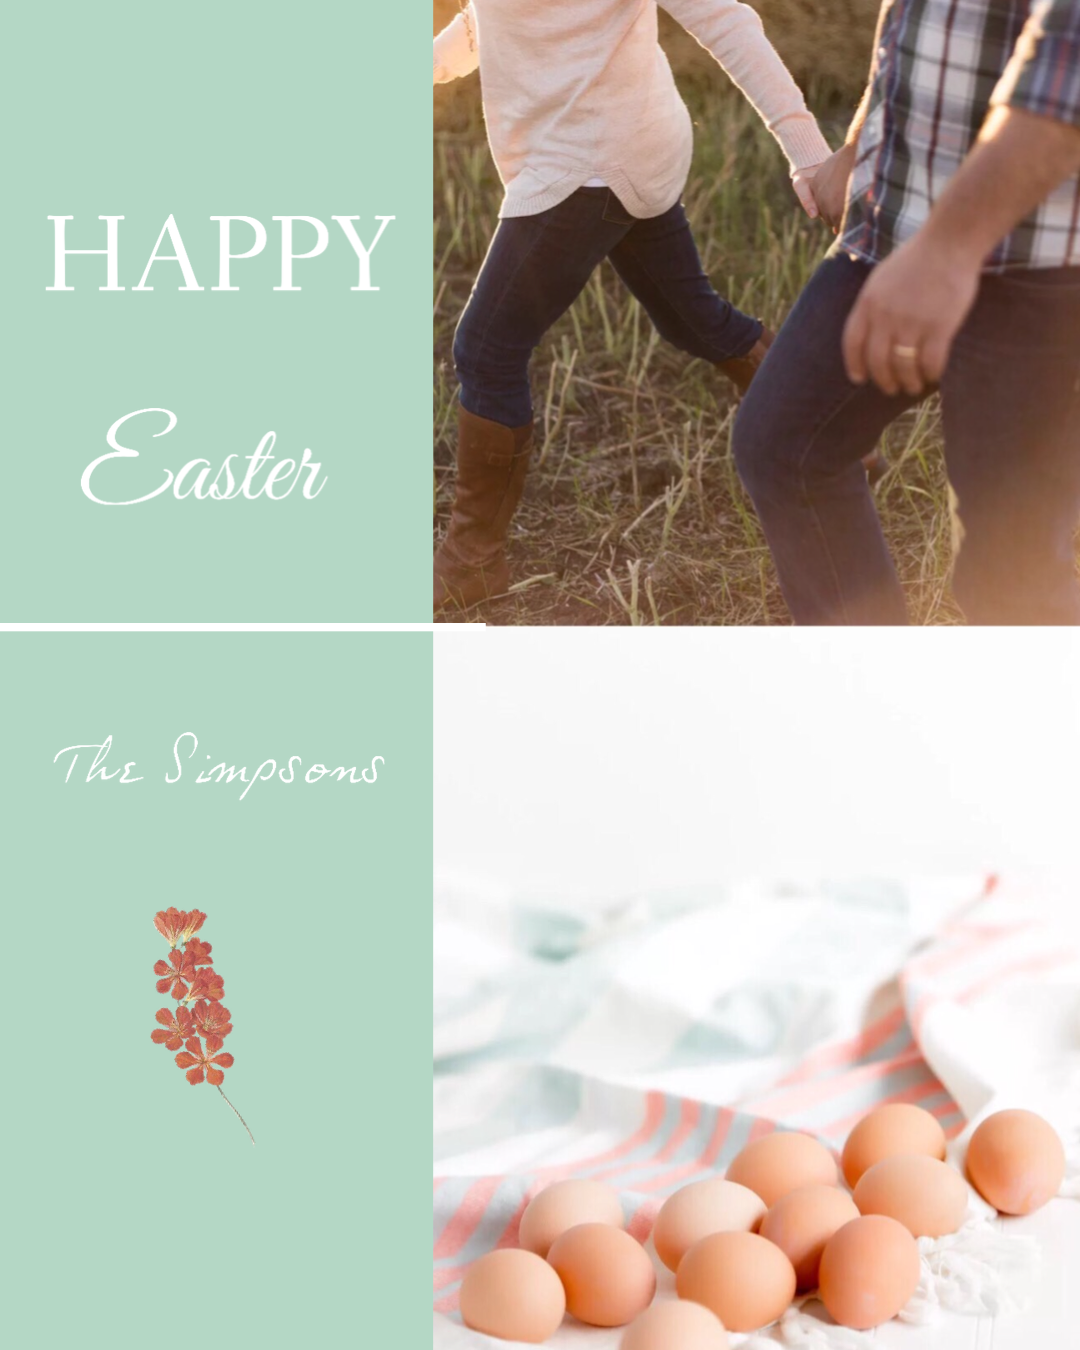 Children Holding Hands Happy Easter Card Template